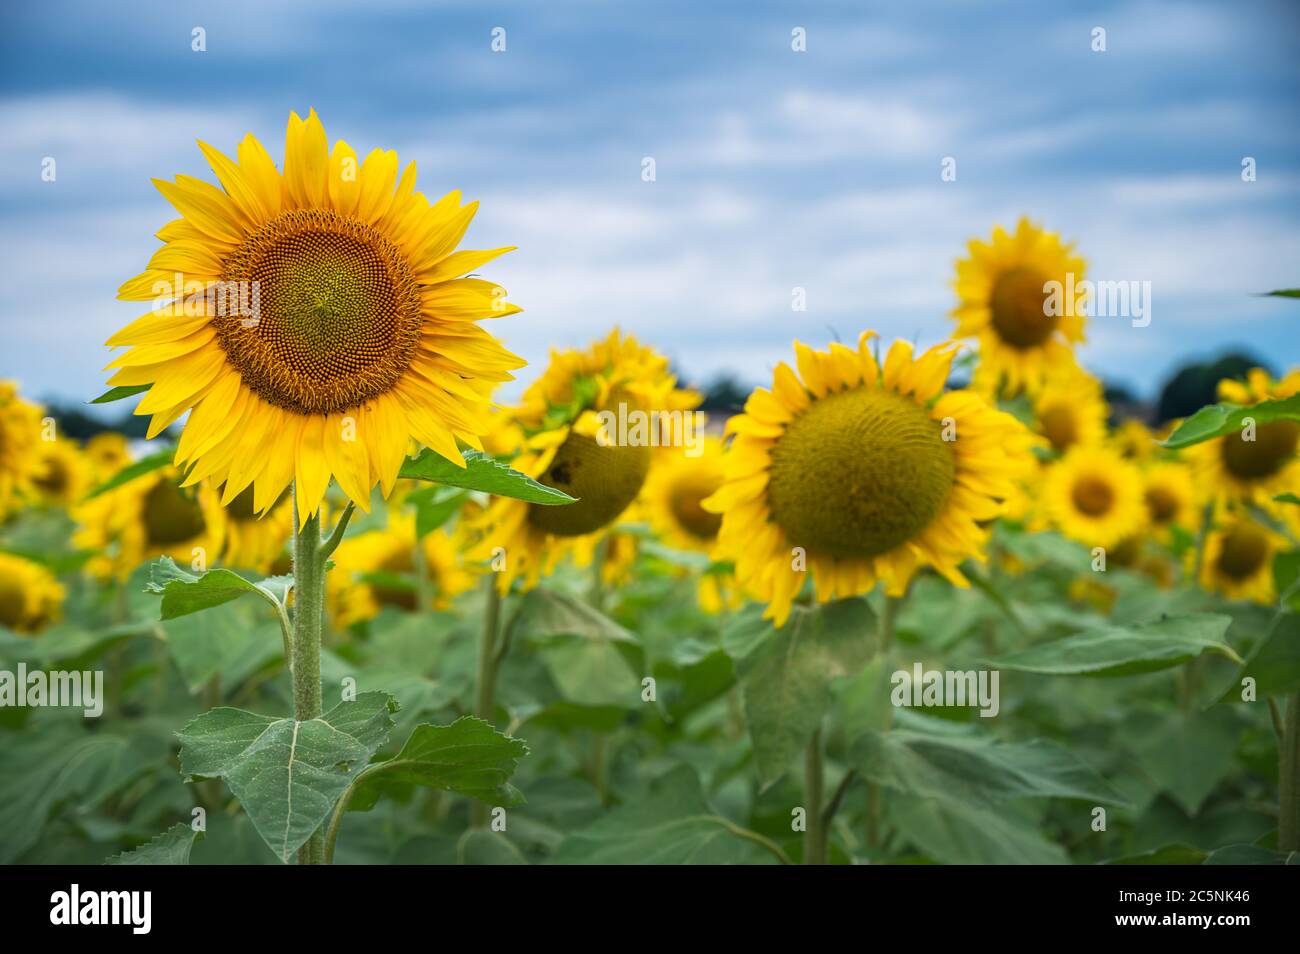 Field of sunflowers under a stormy sky  Stock Photo